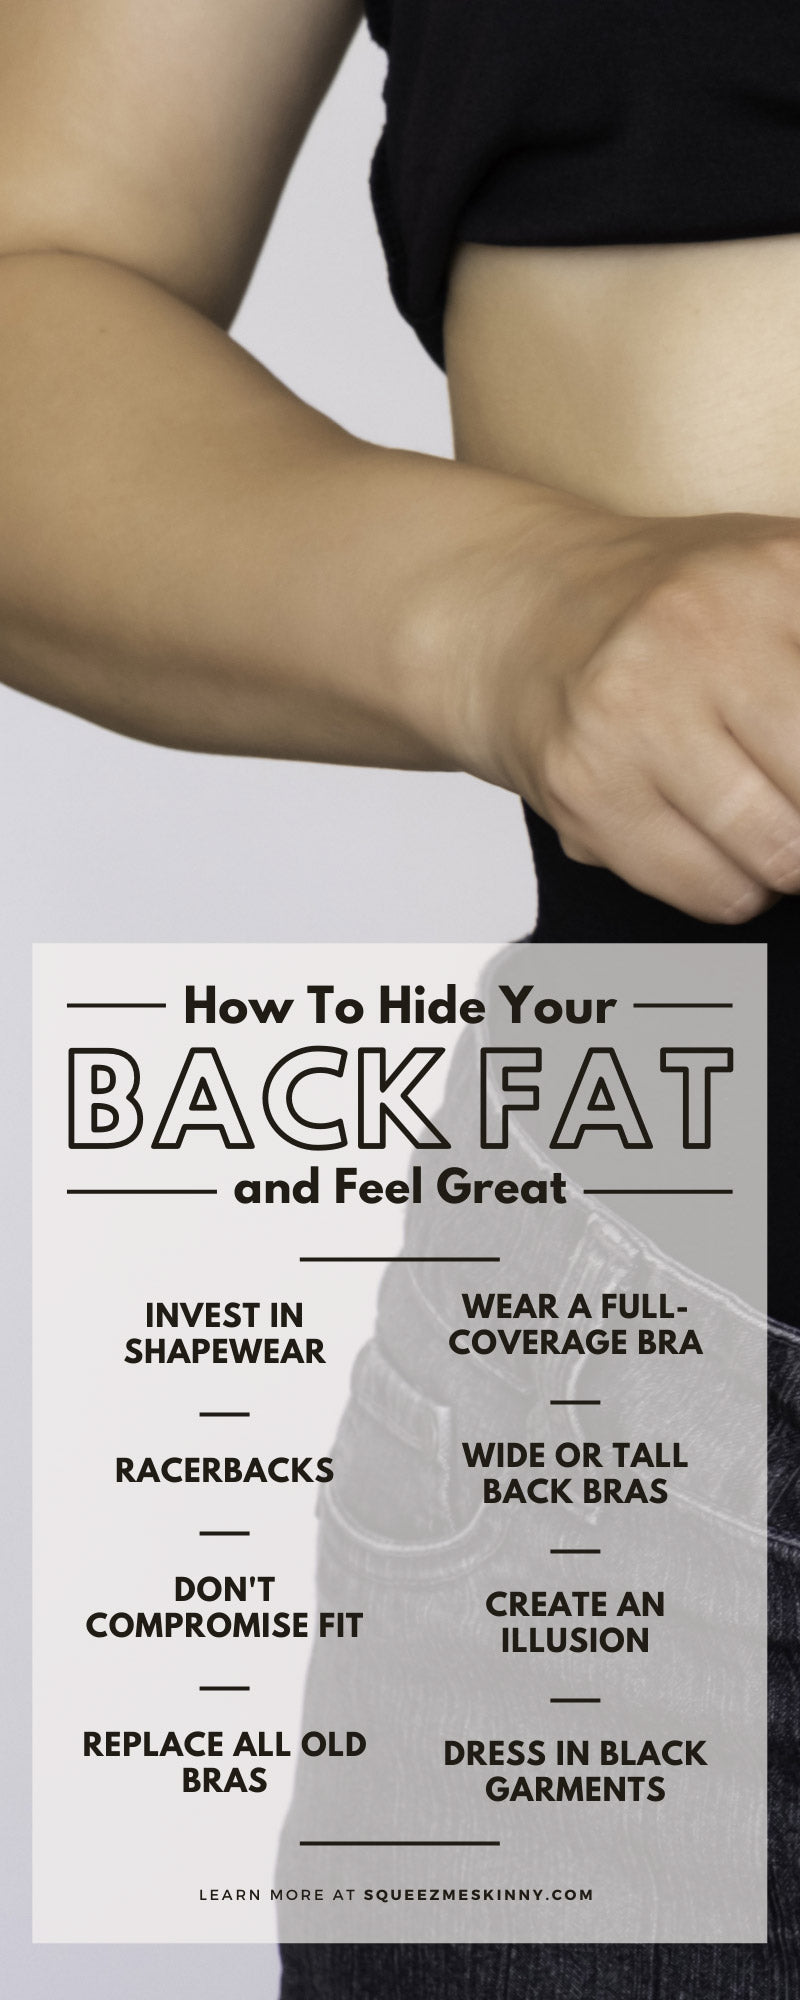 How To Hide Your Back Fat and Feel Great